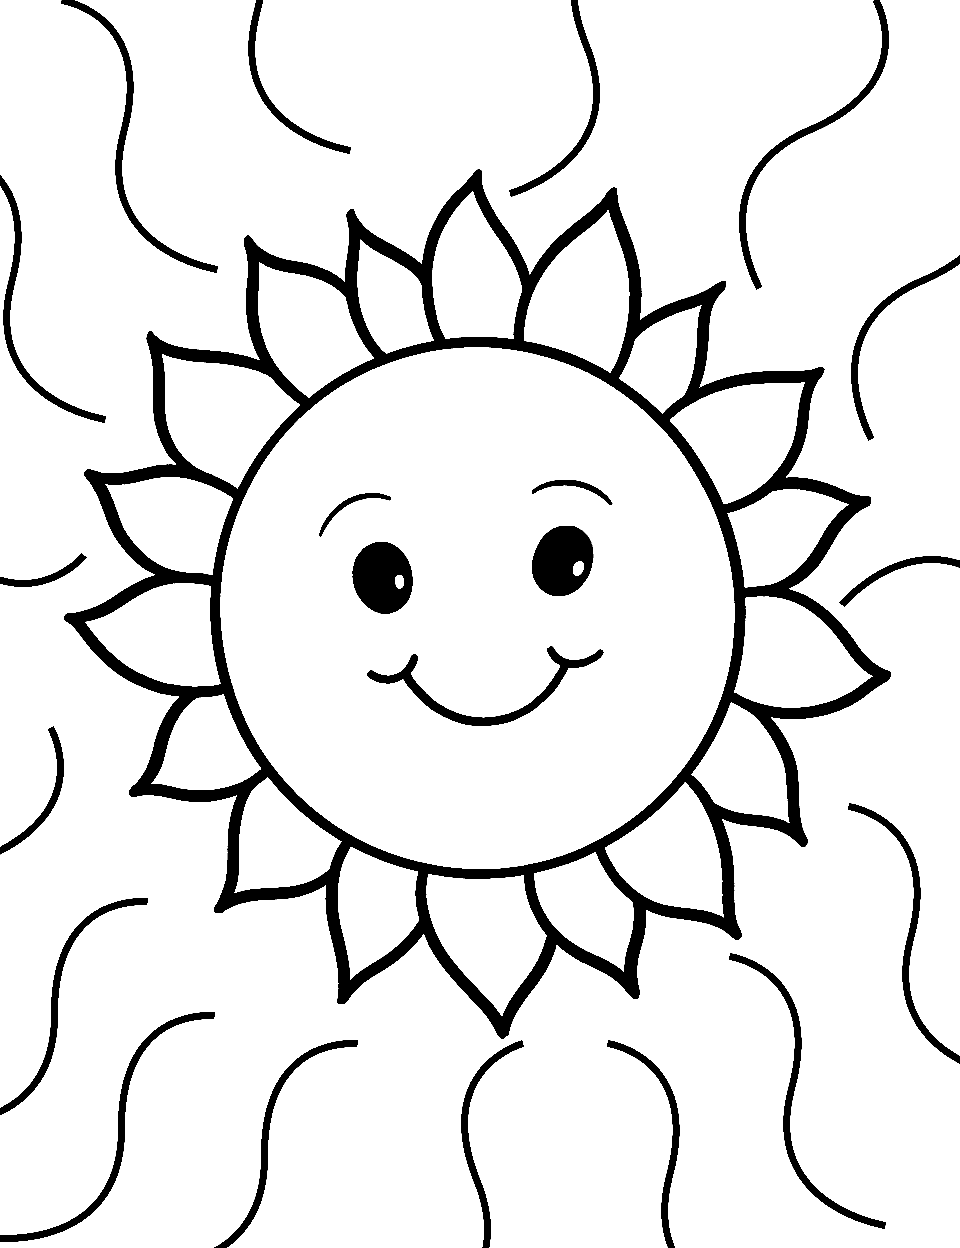 Sunshine Serenity Coloring Page - A big smiling sun giving heat and warmth to everything.